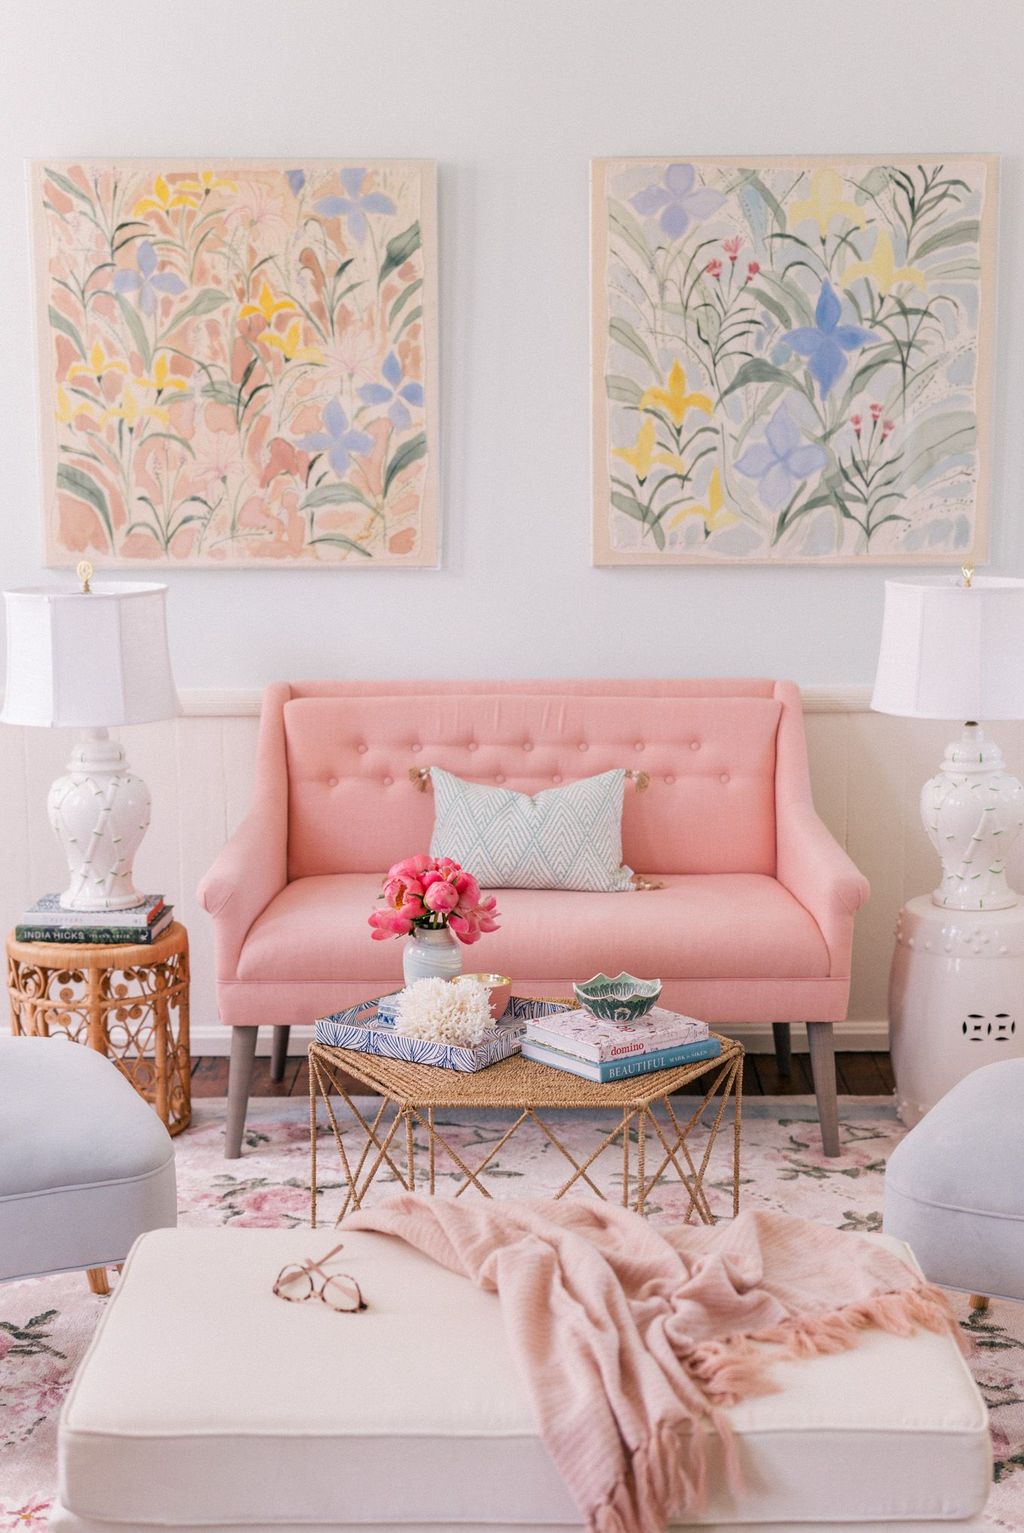 39 Amazing Floral Living Room Decor Ideas That You Will Love - SWEETYHOMEE